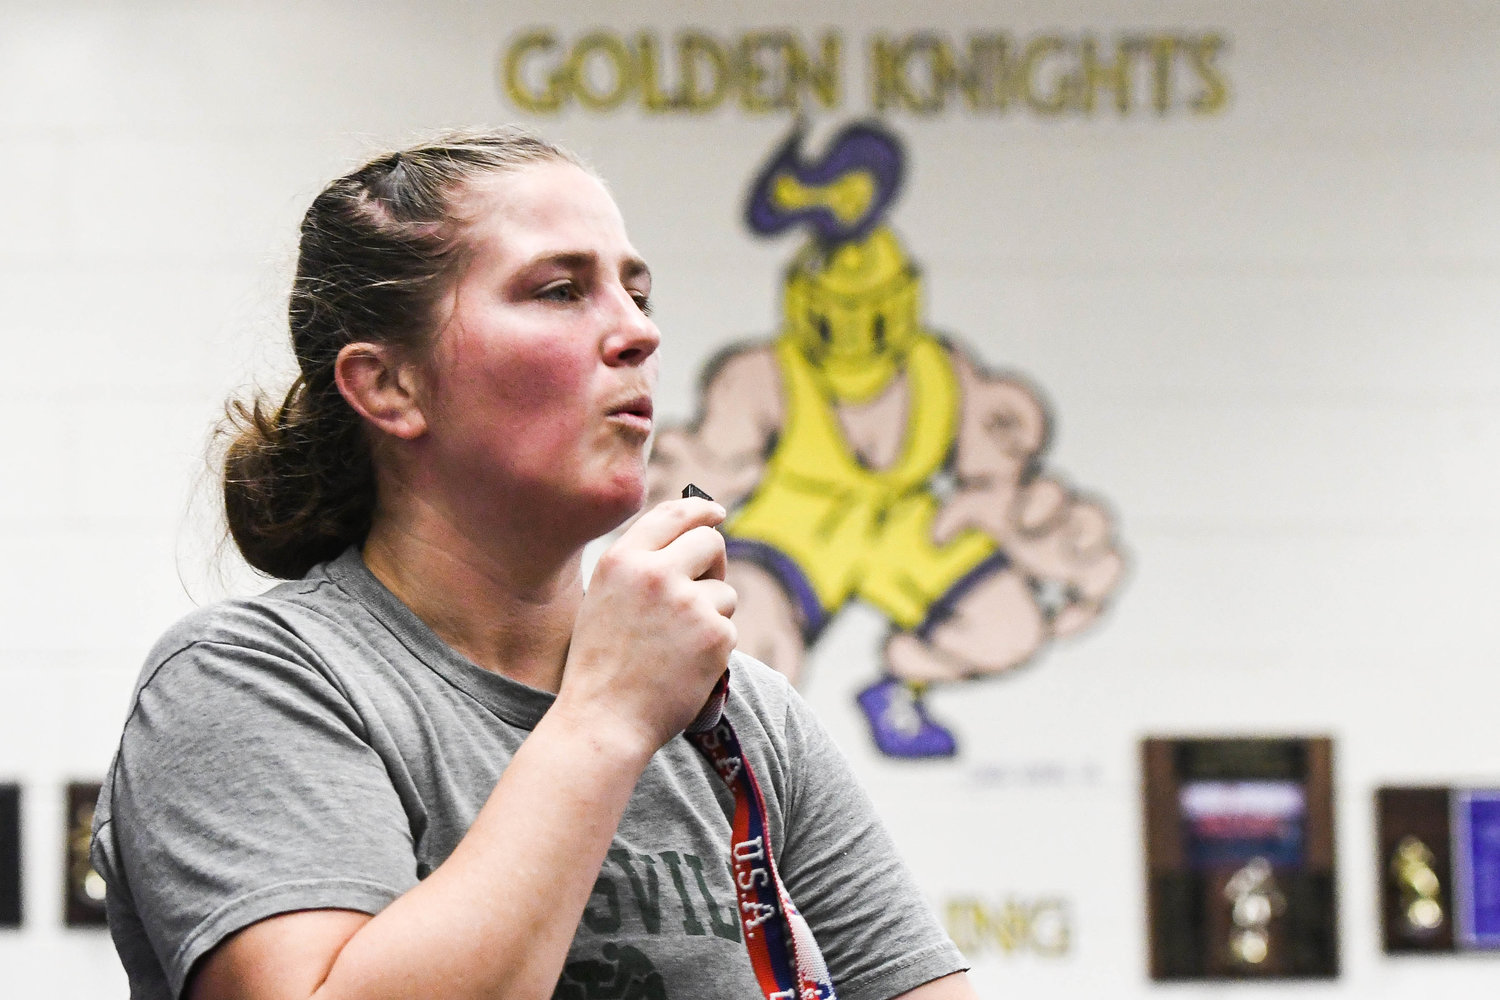 Holland Patent head coach Samantha Doxstader blows a whistle during warm up drills at wrestling practice on Monday at Holland Patent High School.